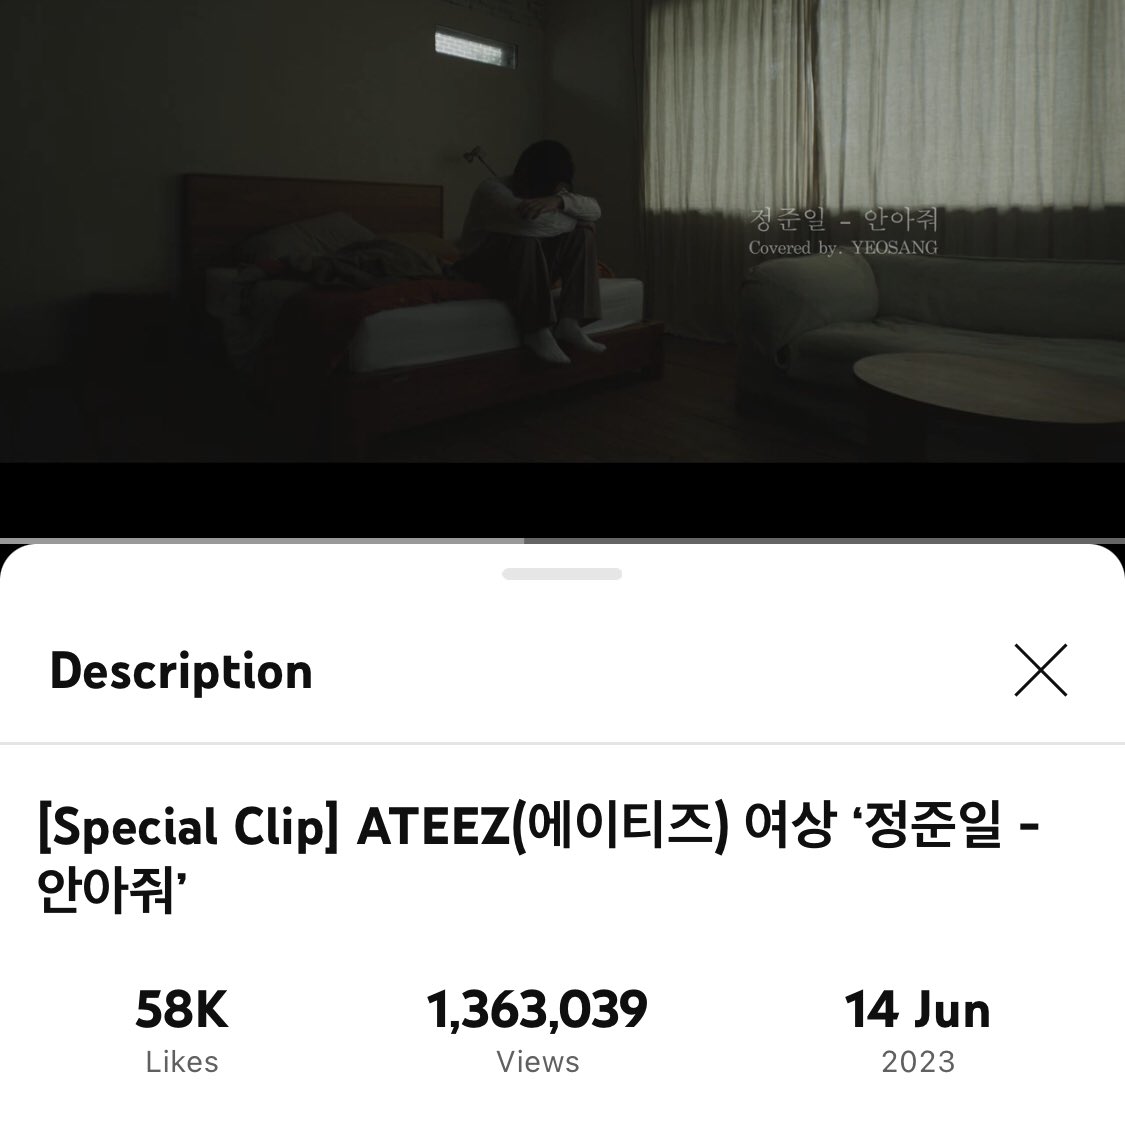 Attention ATINY! YEOSANG’s ‘Hug Me’ cover has now surpassed 1.3M views. We have less than 2 hours left before his birthday end so let’s try our best and give him 1.5M views!

🔗 youtu.be/RN0qfrtBfzM 

#HugFromYeosang 
#CelestialVoiceYeosangDay 
#YEOSANG #여상 #ATEEZ #에이티즈